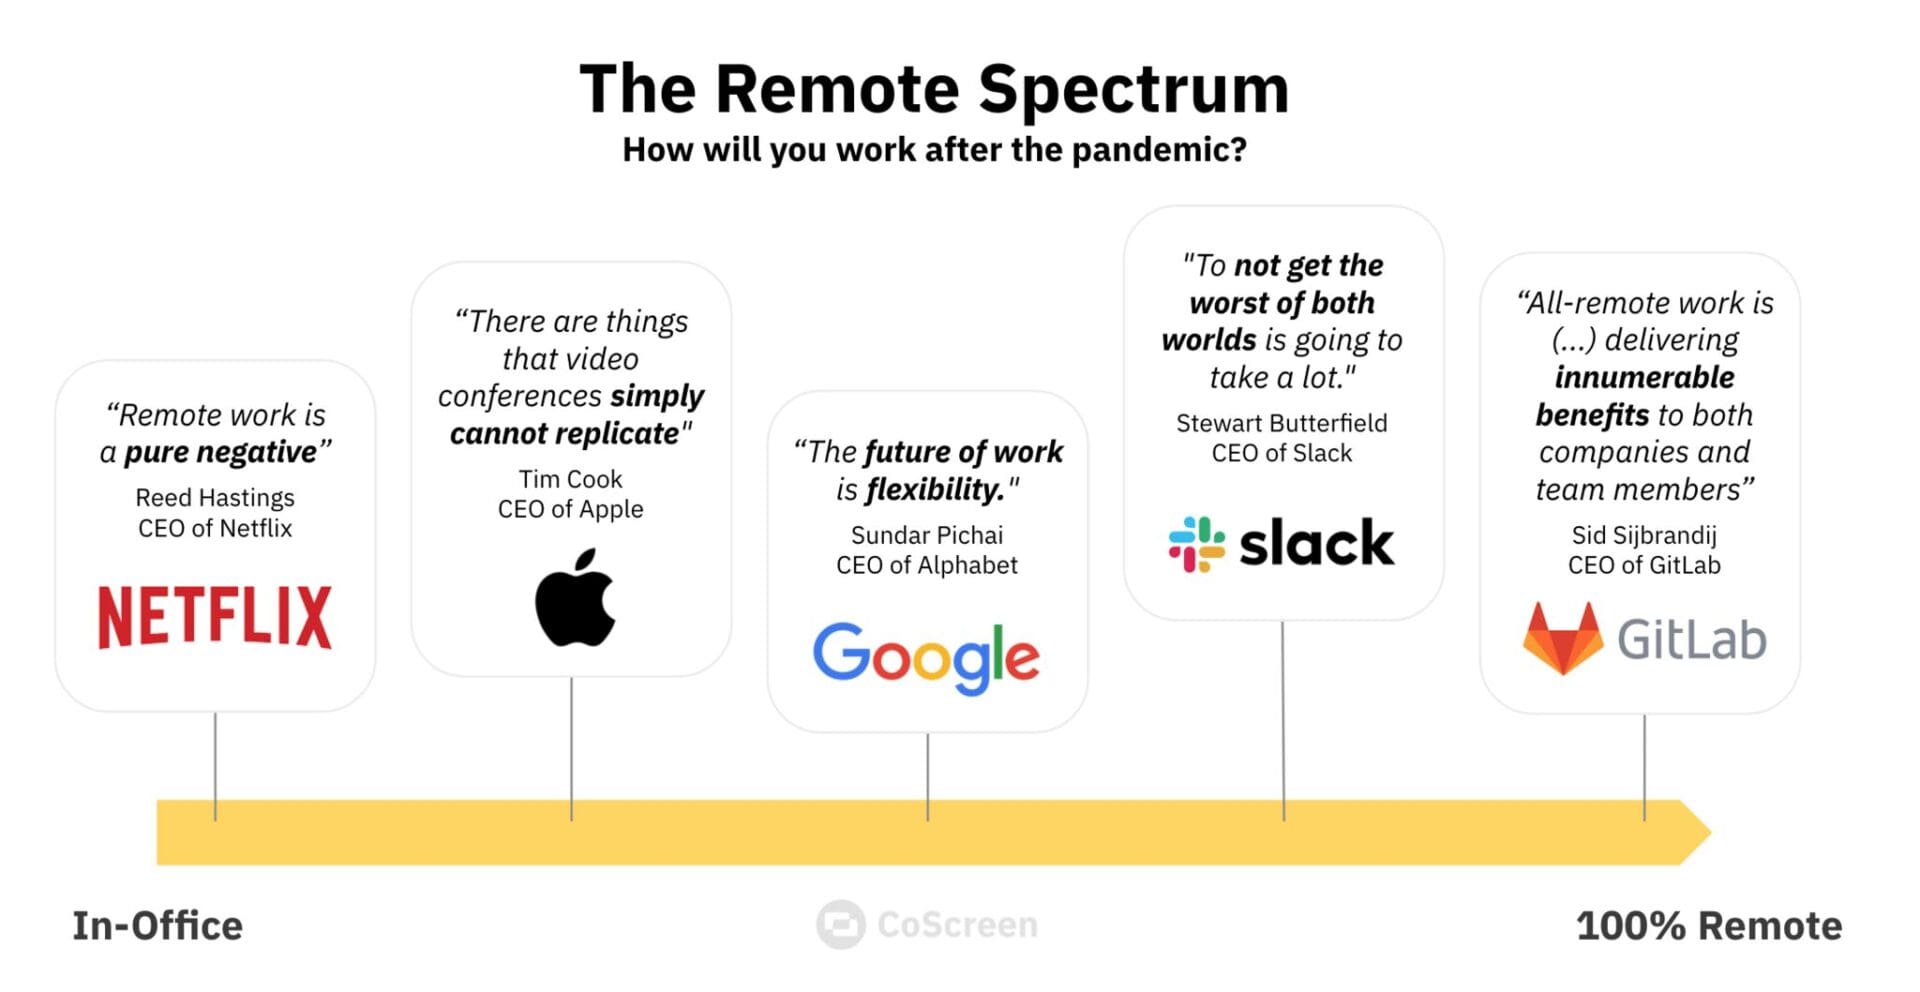 Showing a spectrum of how different companies will work after the pandemic, from Netflix in the office to GitHub 100% remote